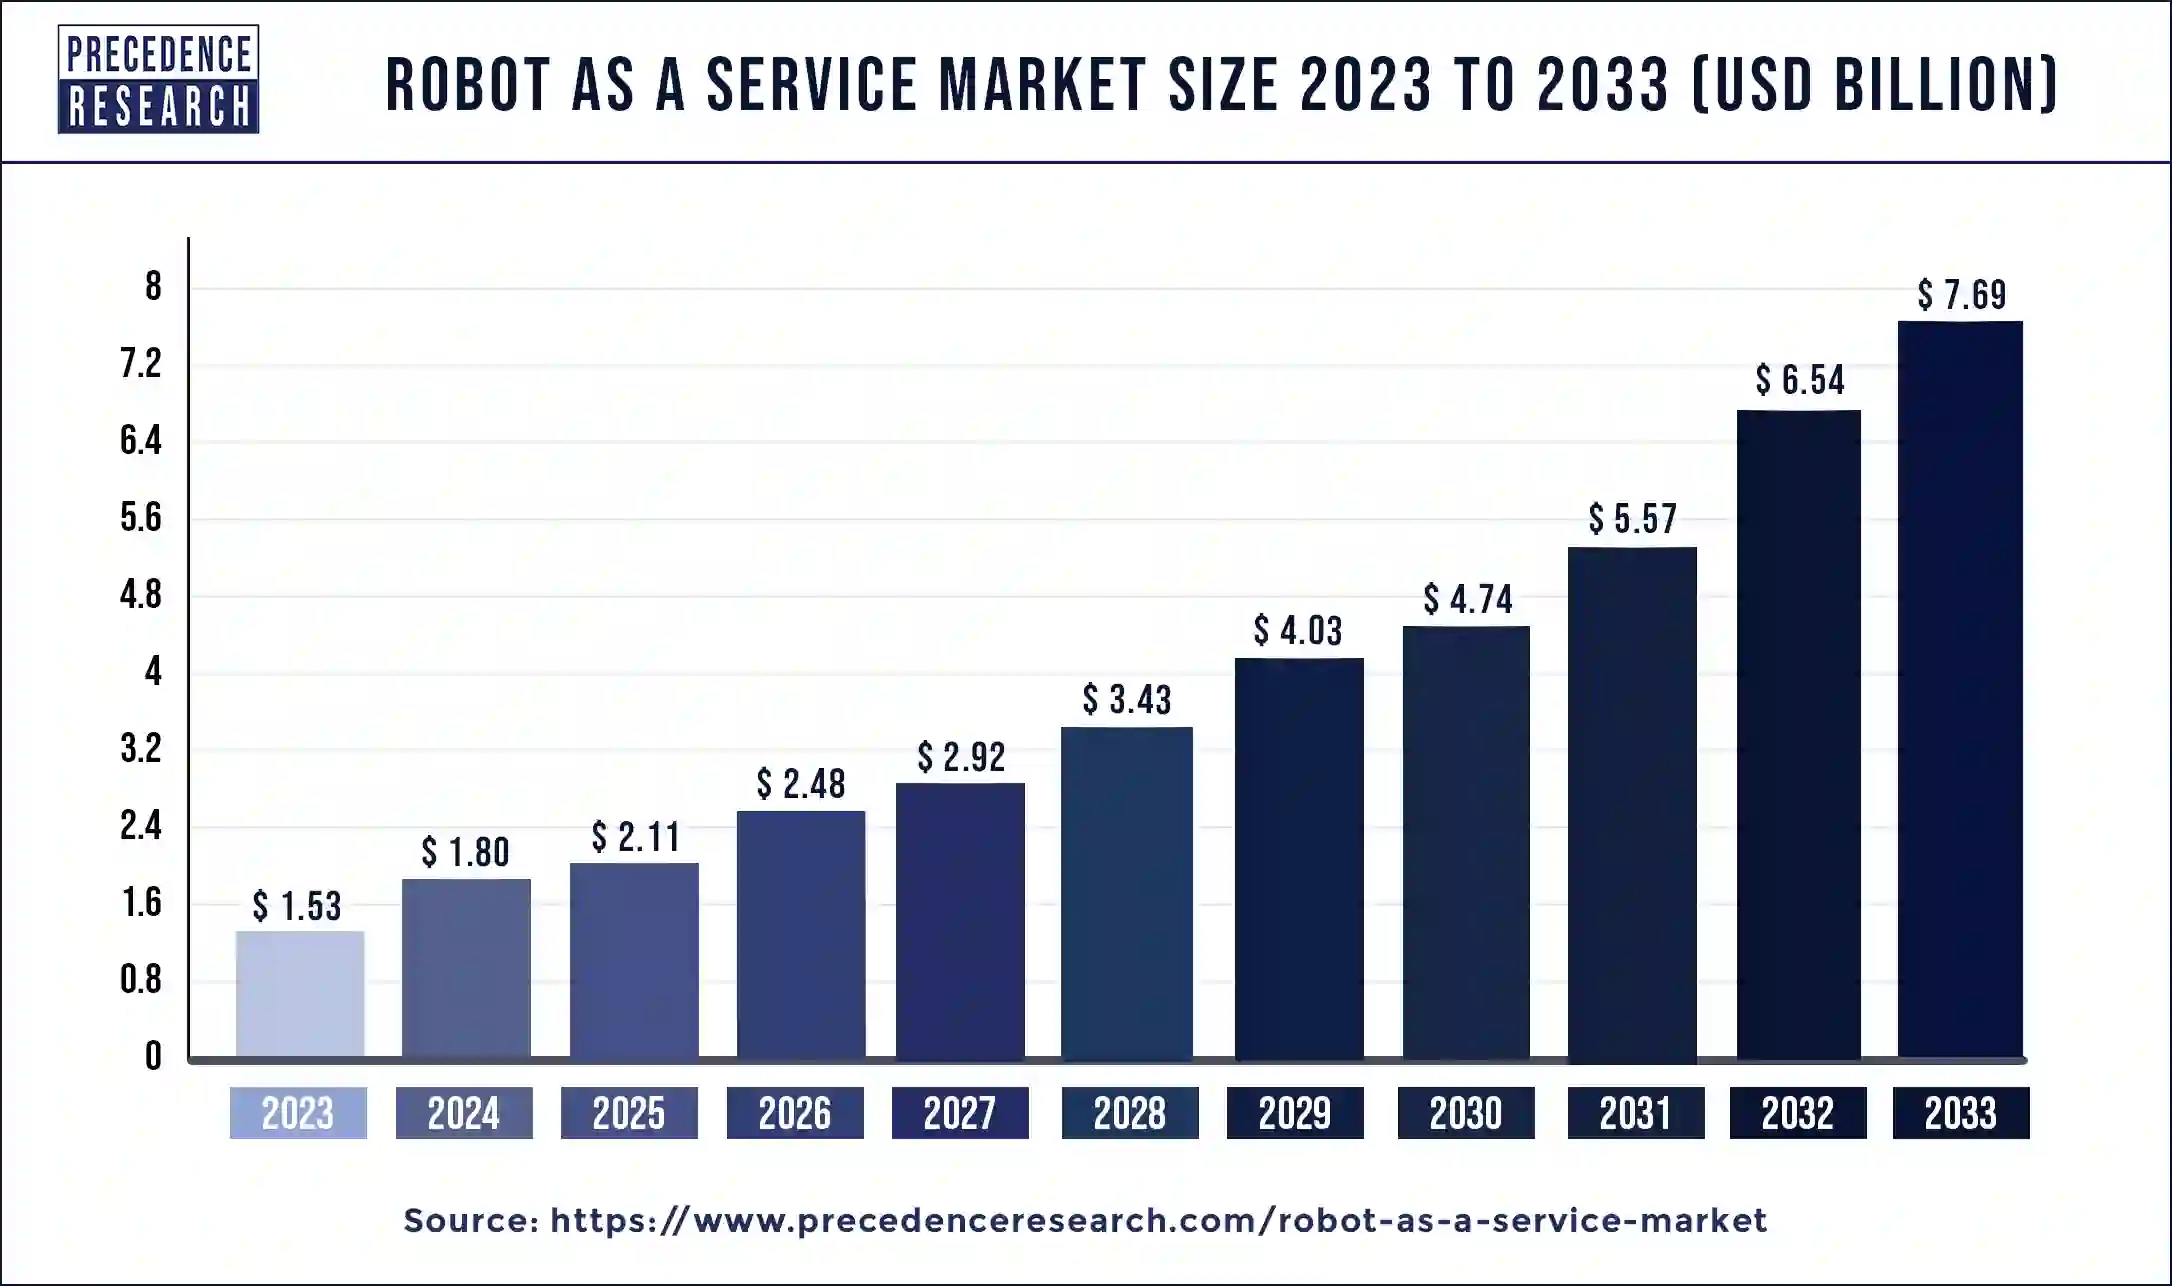 Robot as a Service Market Size 2024 to 2033